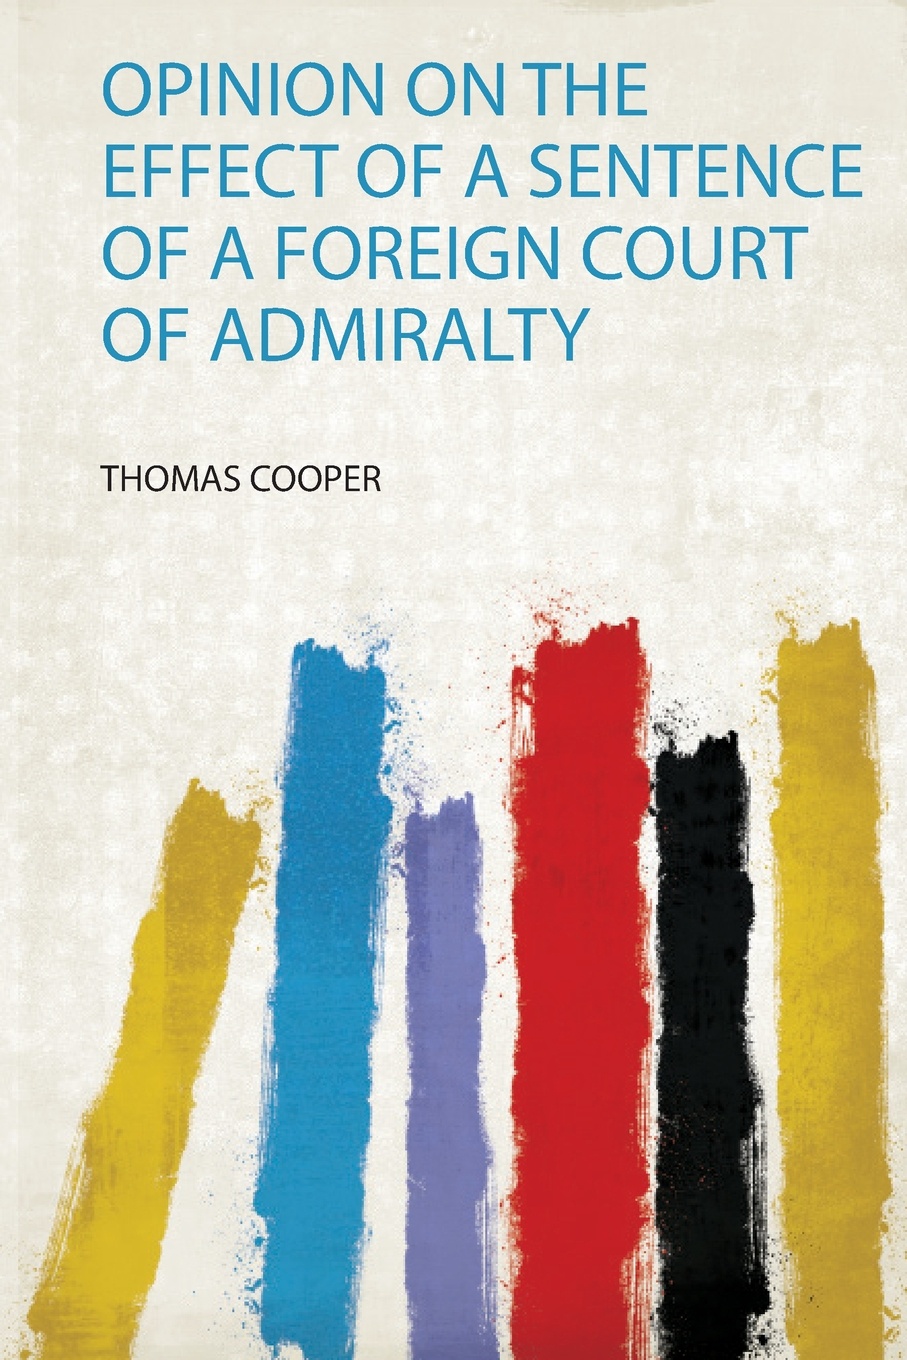 Opinion on the Effect of a Sentence of a Foreign Court of Admiralty